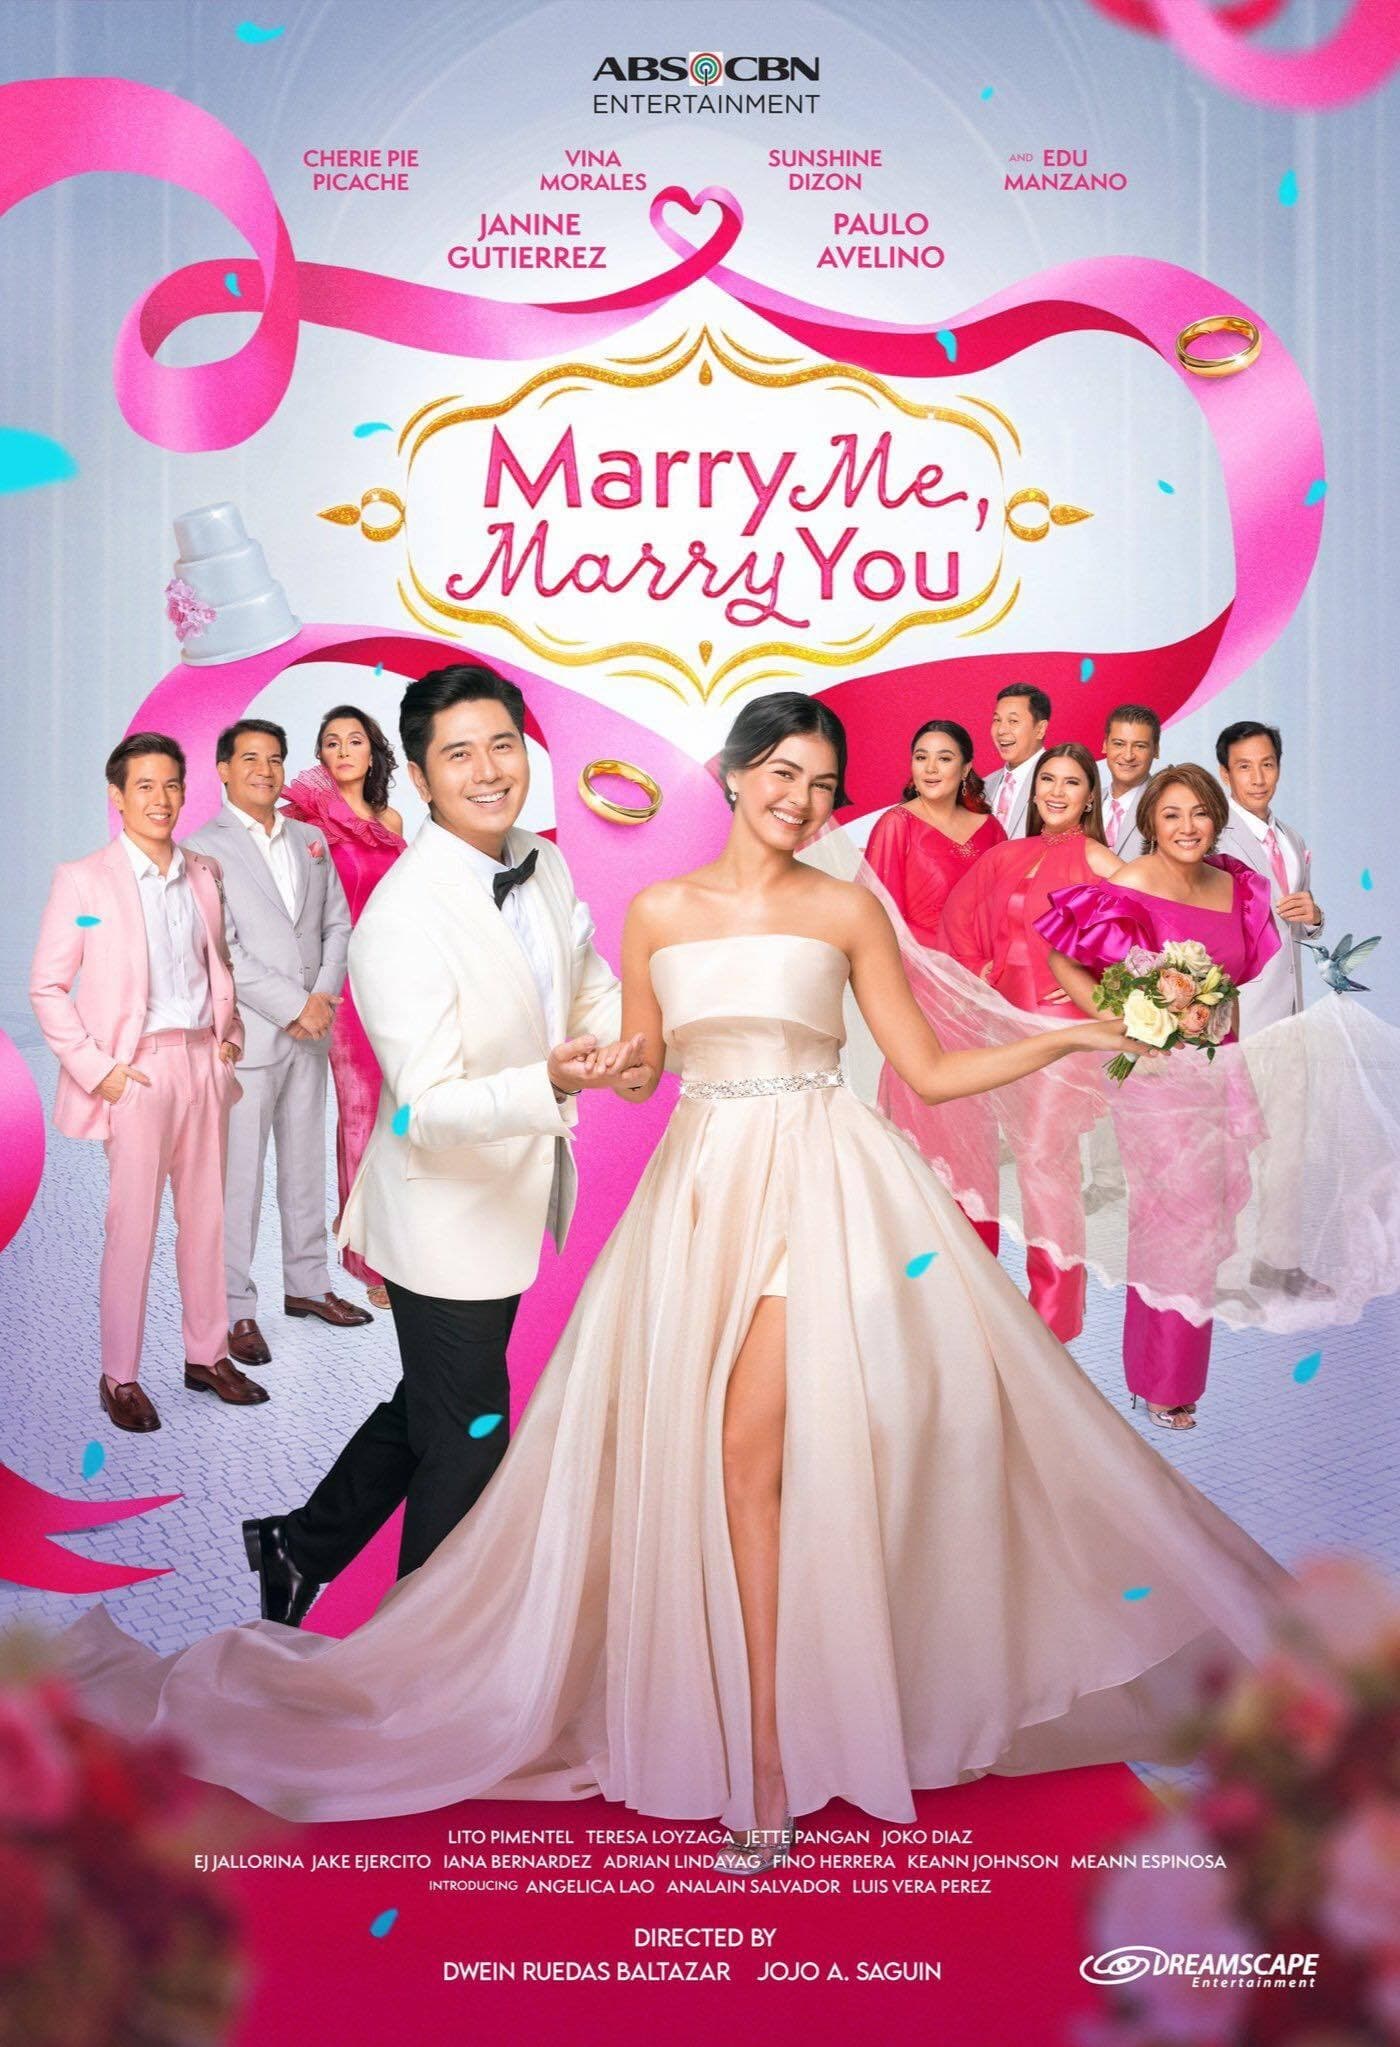 Marry Me, Marry You TV Shows About Enemies To Lovers